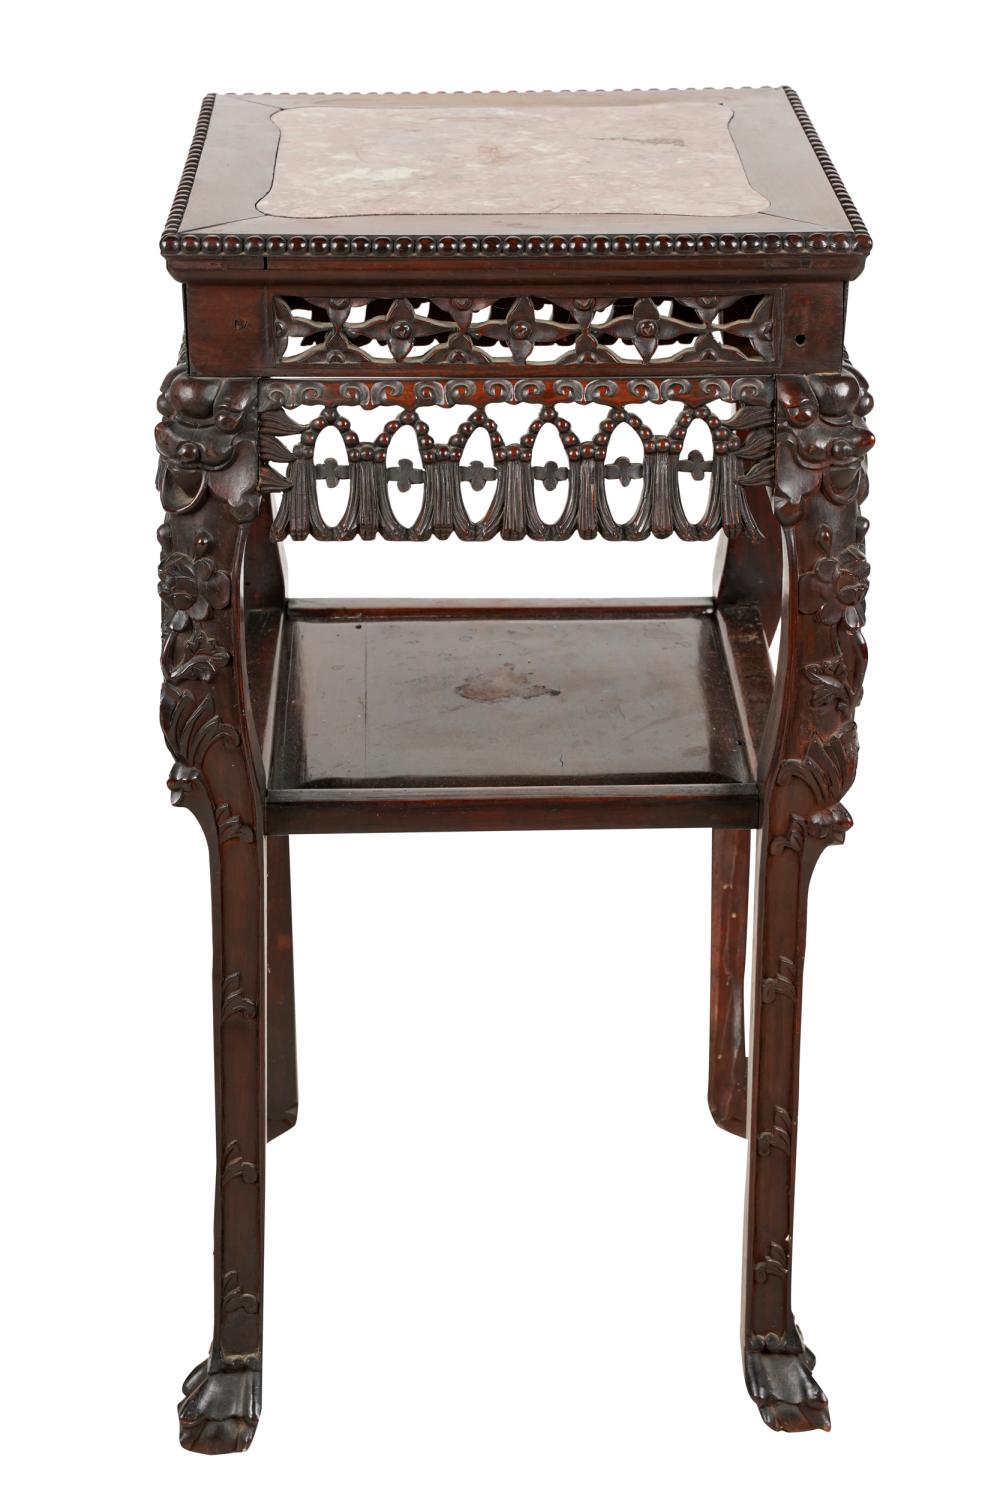 CHINESE CARVED MARBLE INSET FERN STANDCondition: